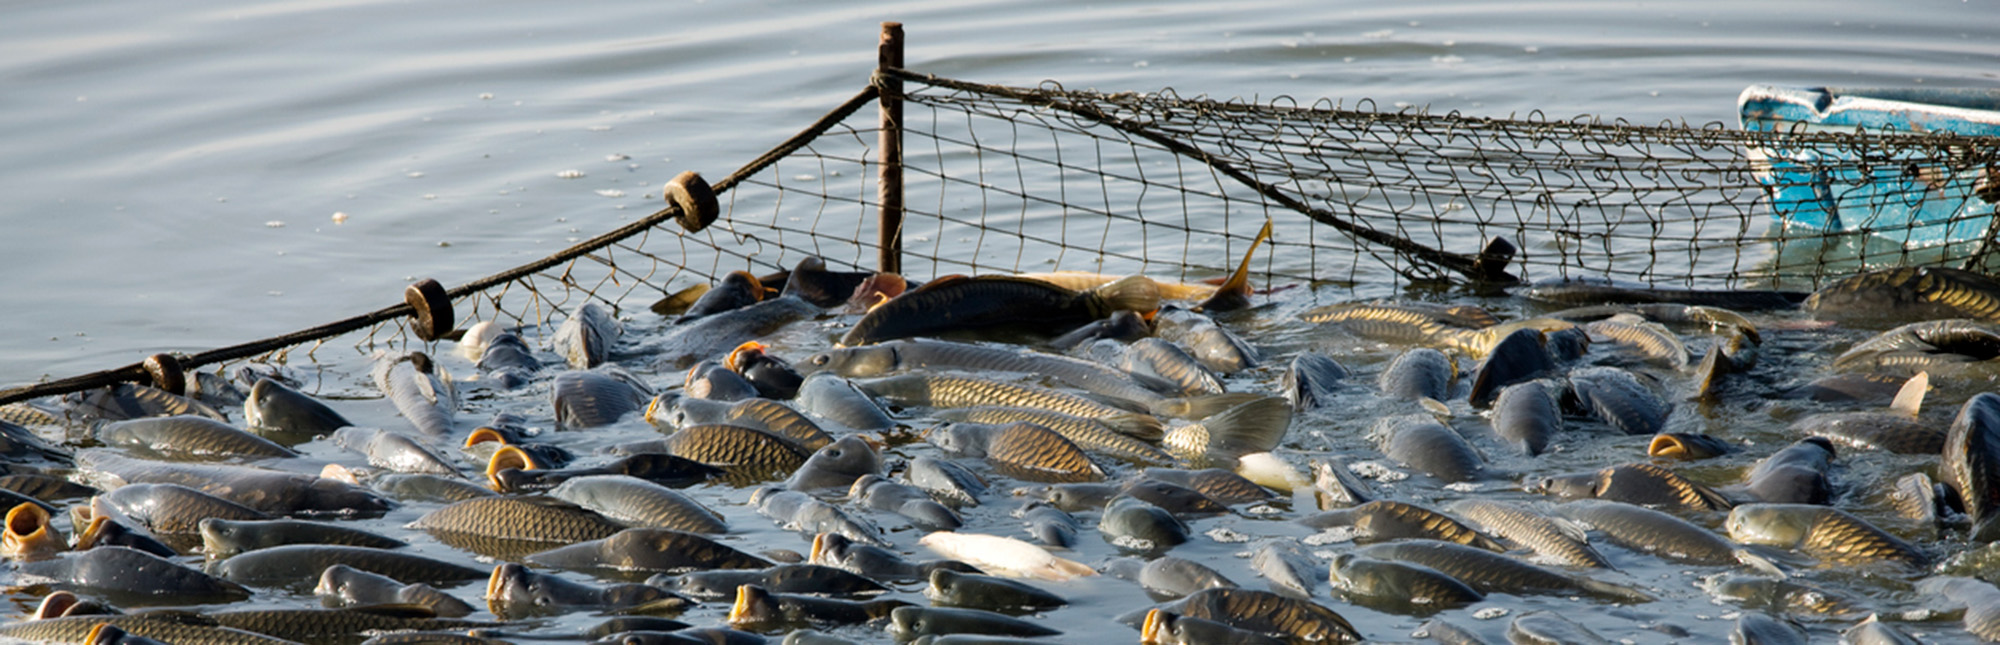 Fish netting with pool of dead fish